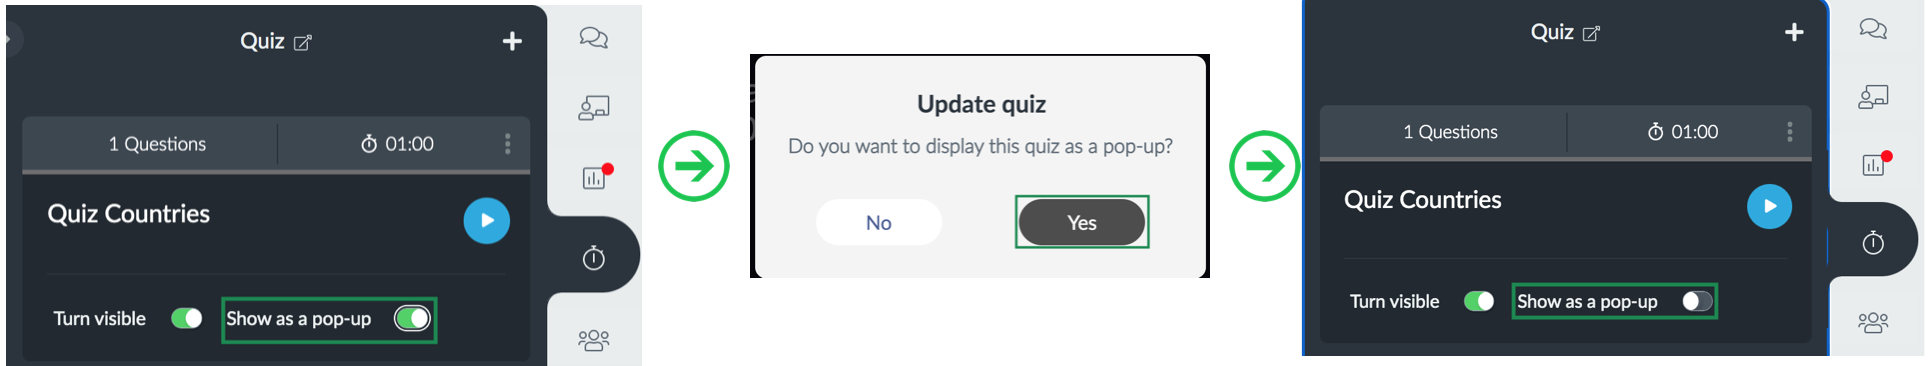 Image showing how to enable the show as pop up for quizzes